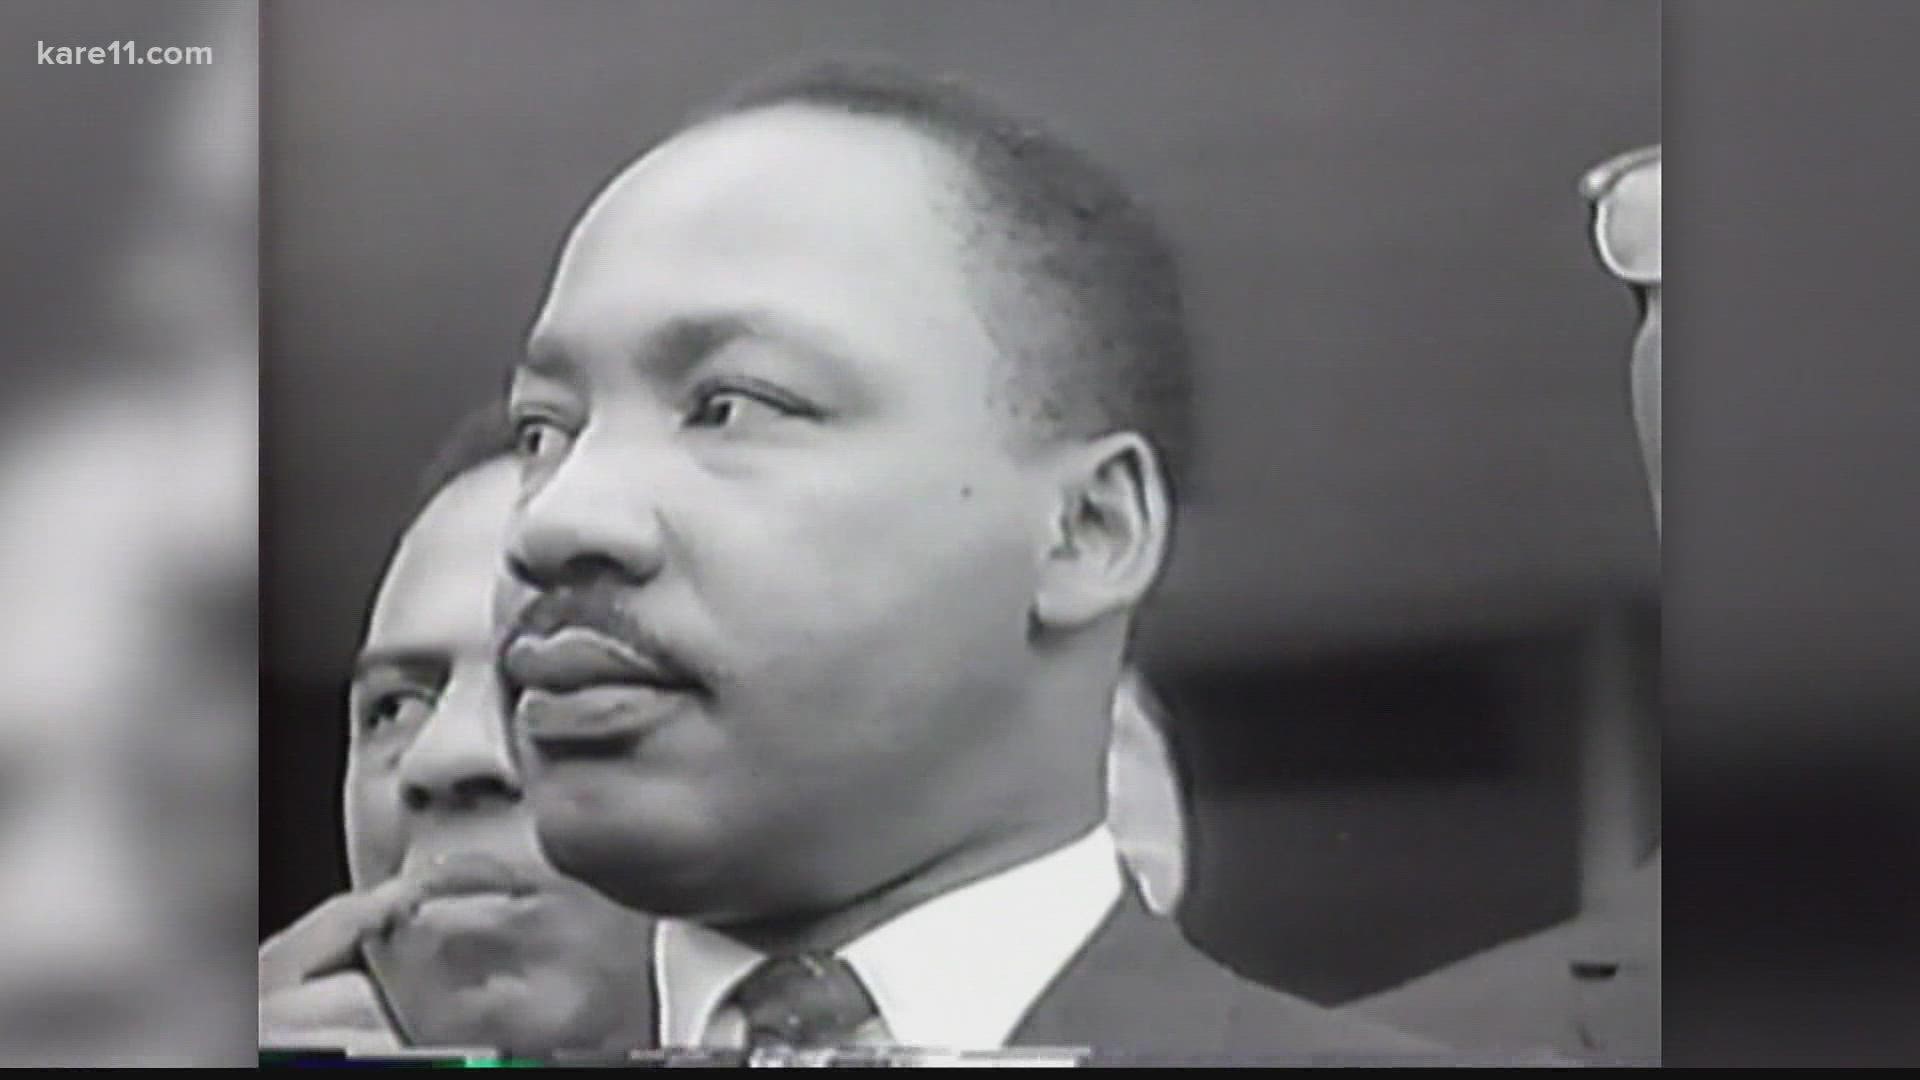 The Distinguished Chair and Professor of History at the University of St. Thomas shared his thoughts on the importance of this year's MLK Day during KARE11 Saturday